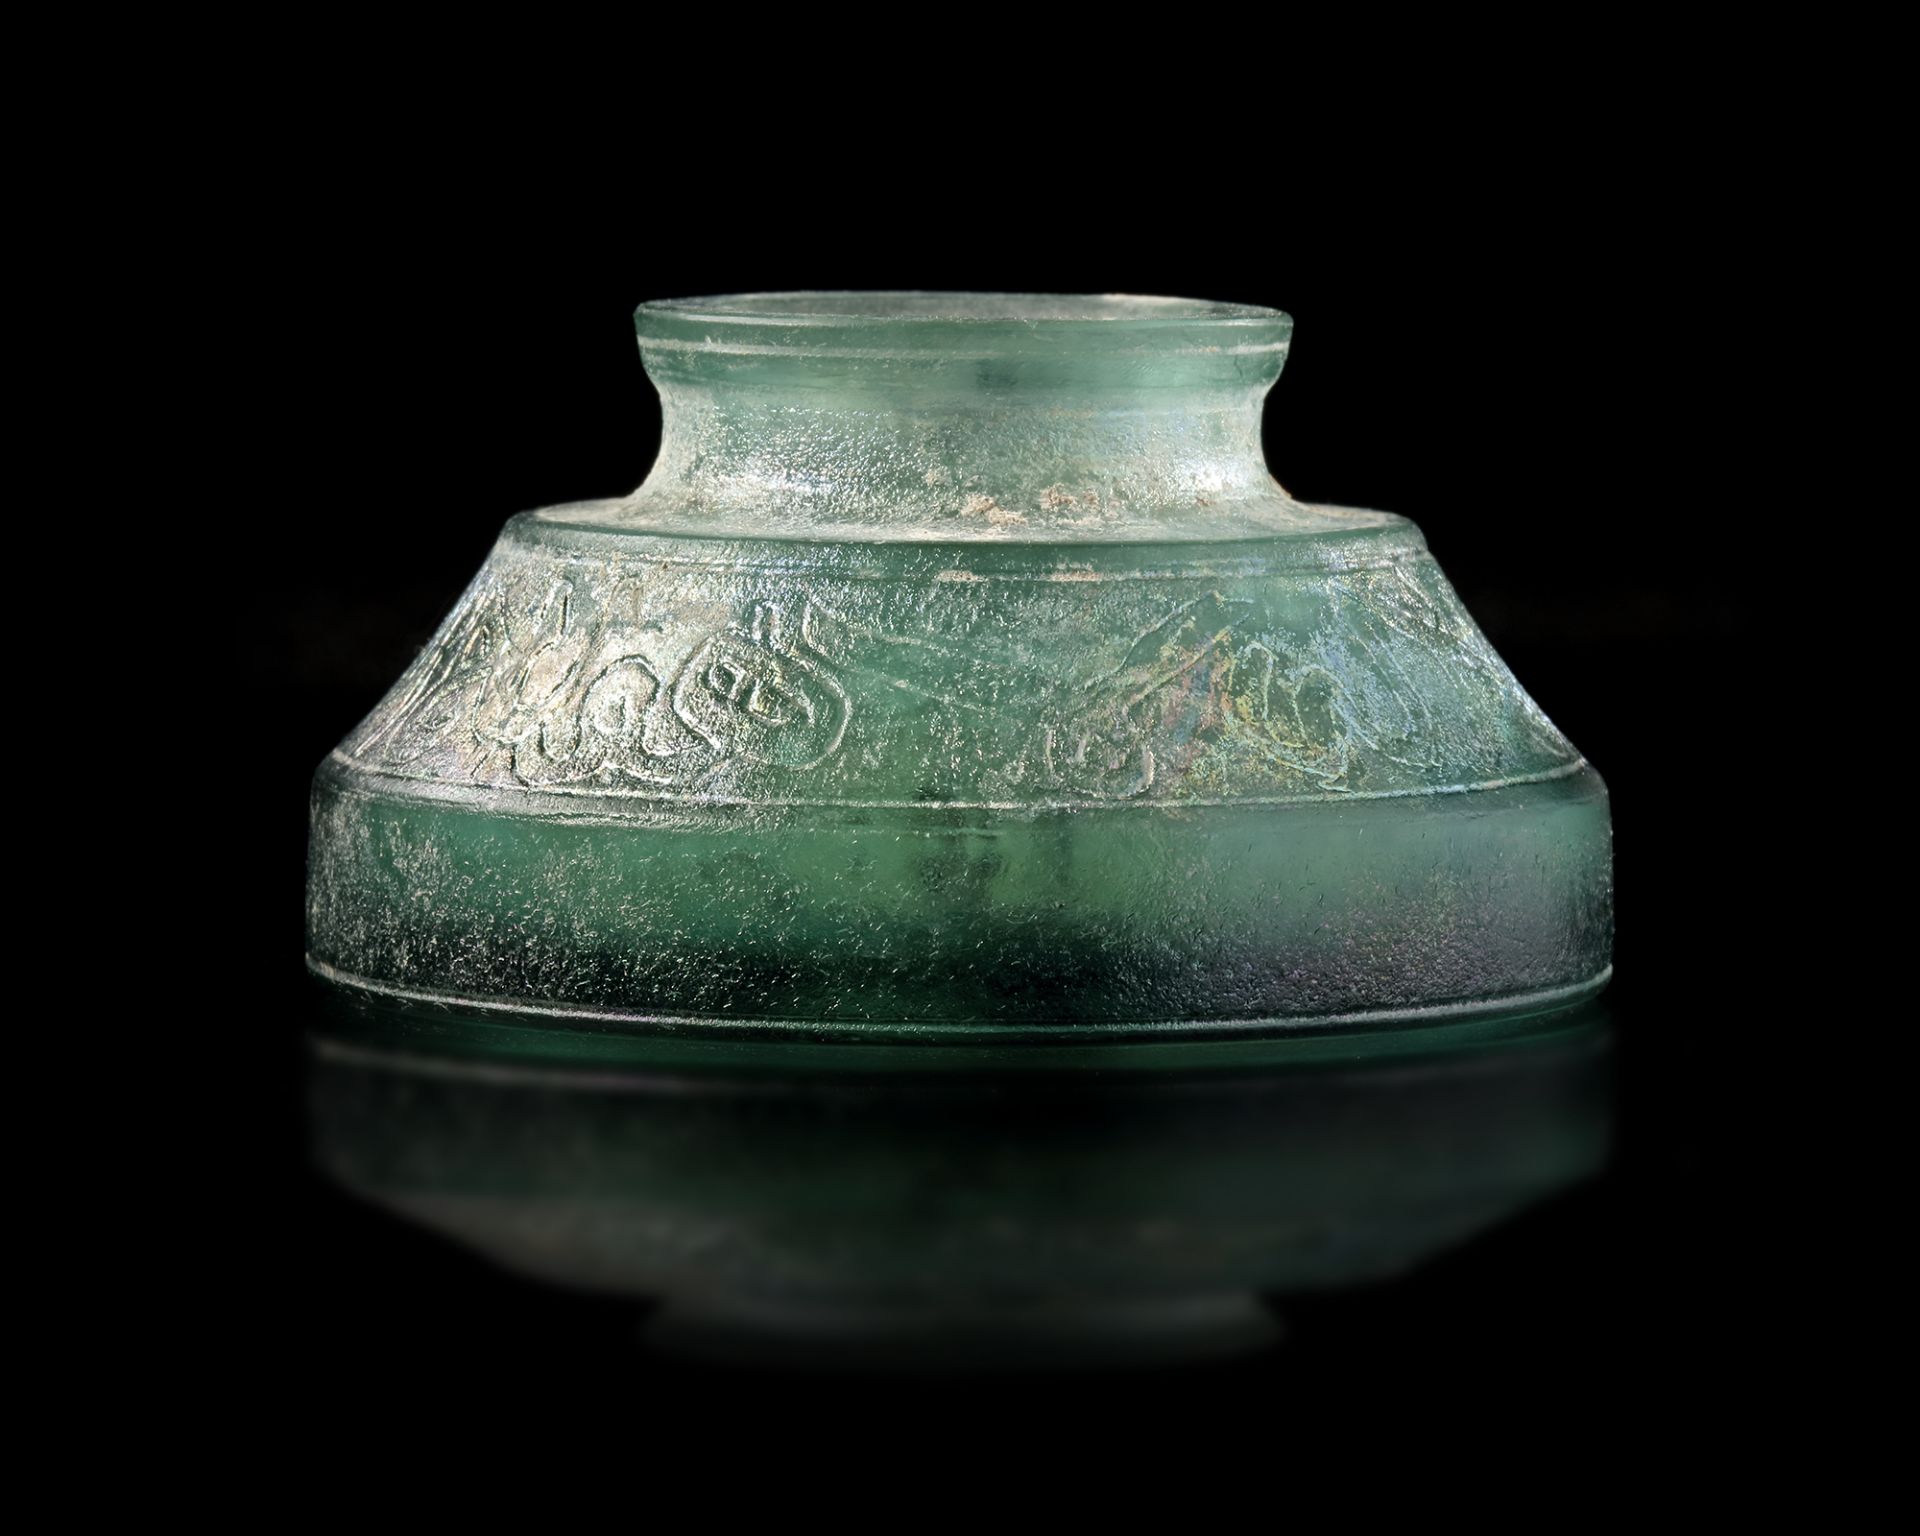 AN EARLY ISLAMIC GLASS INKWELL, PERSIA, 12TH-13TH CENTURY - Image 4 of 6